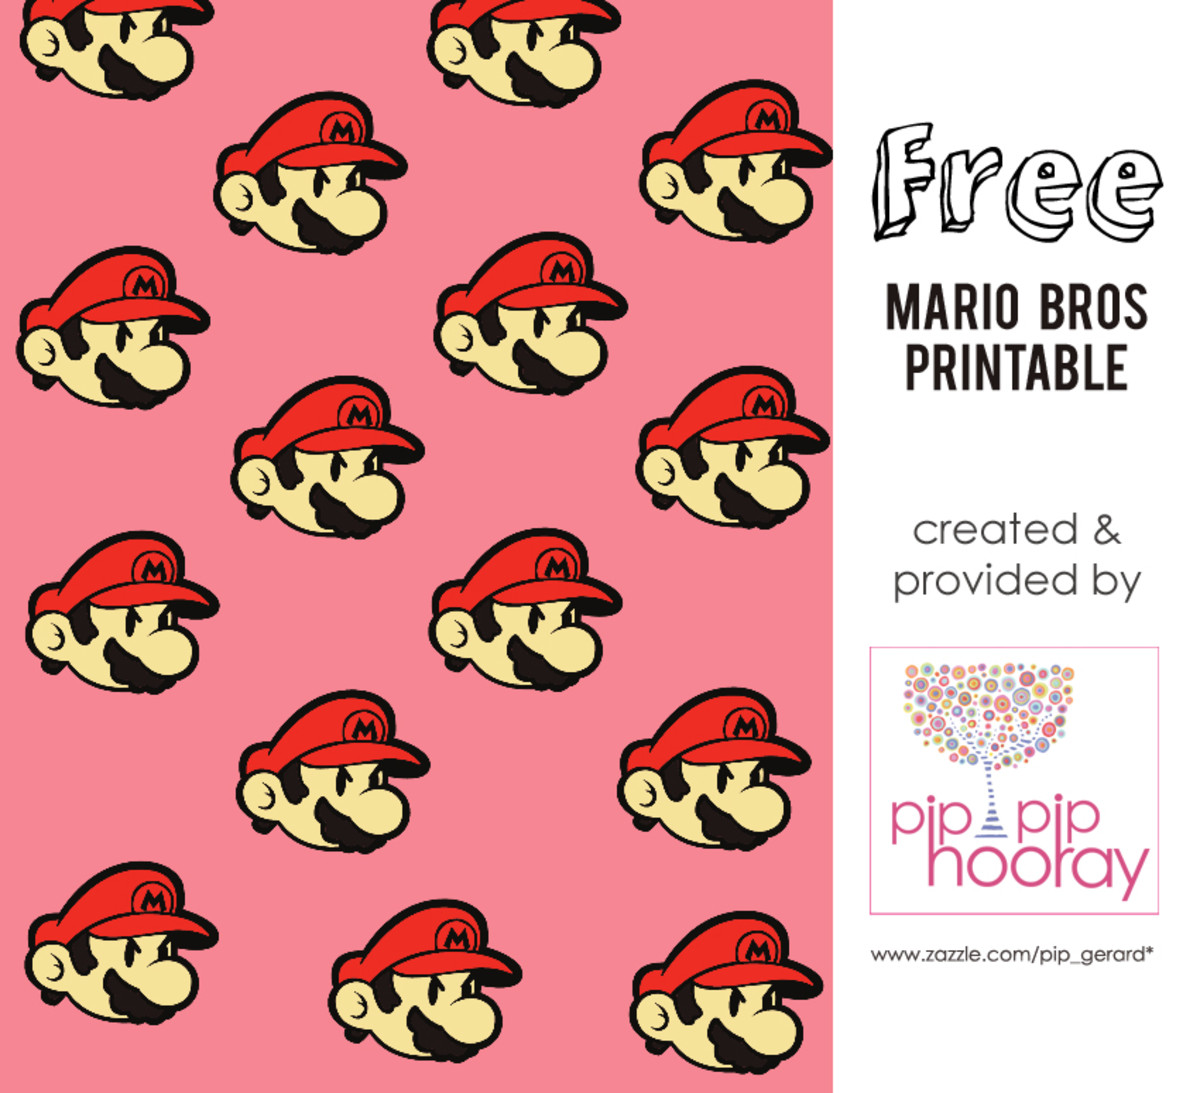 You can find many creative uses for this printable Mario-themed paper.